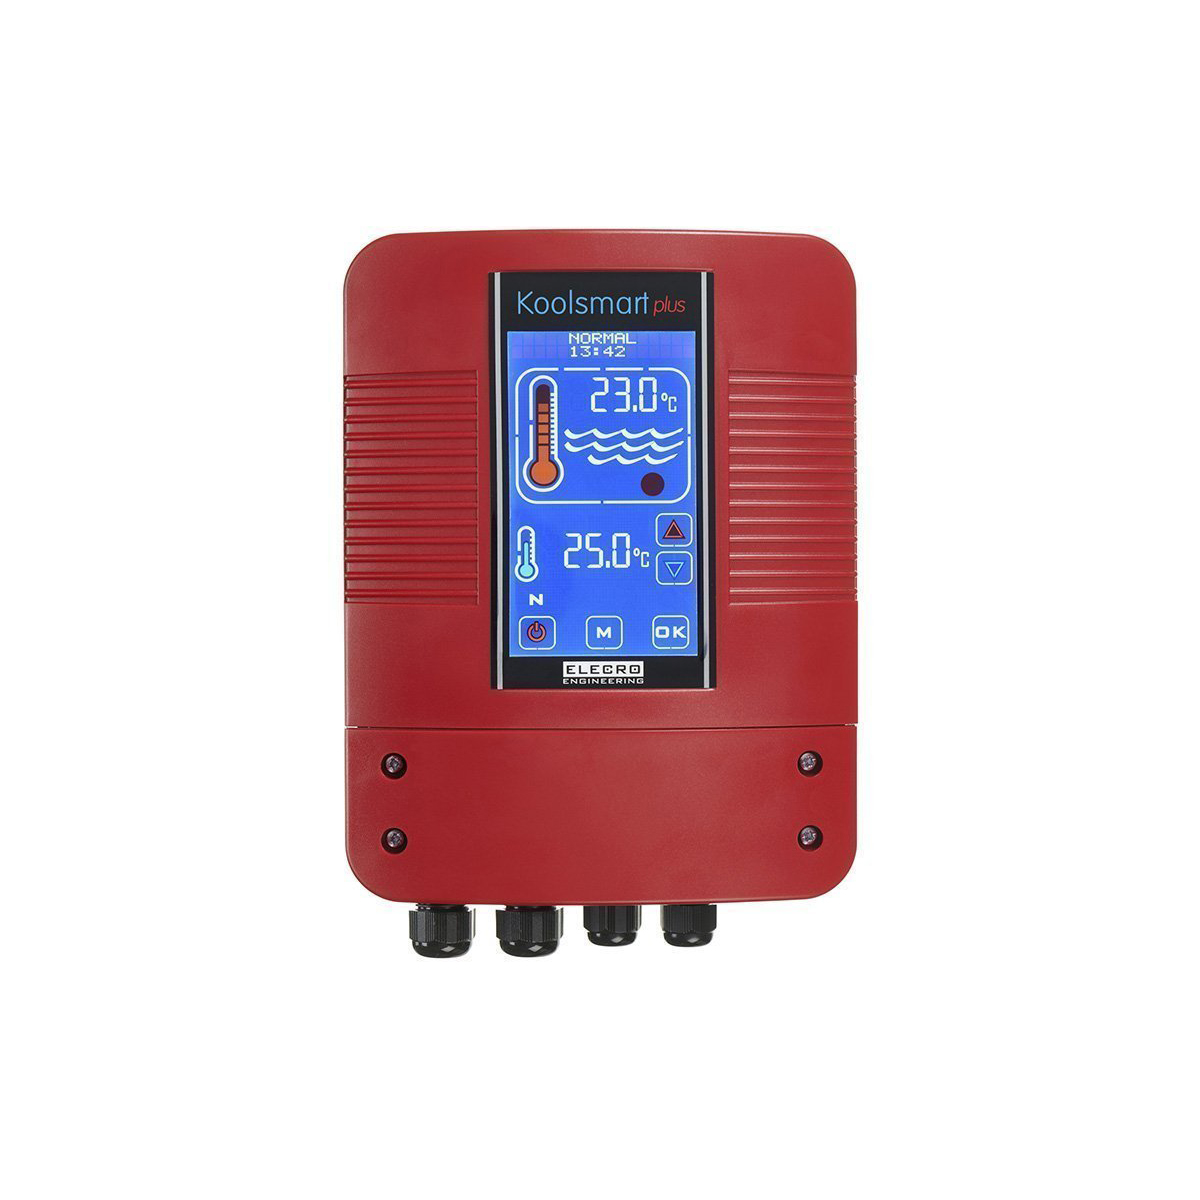 Smart touch screen cooling controller Smart touch screen cooling controller